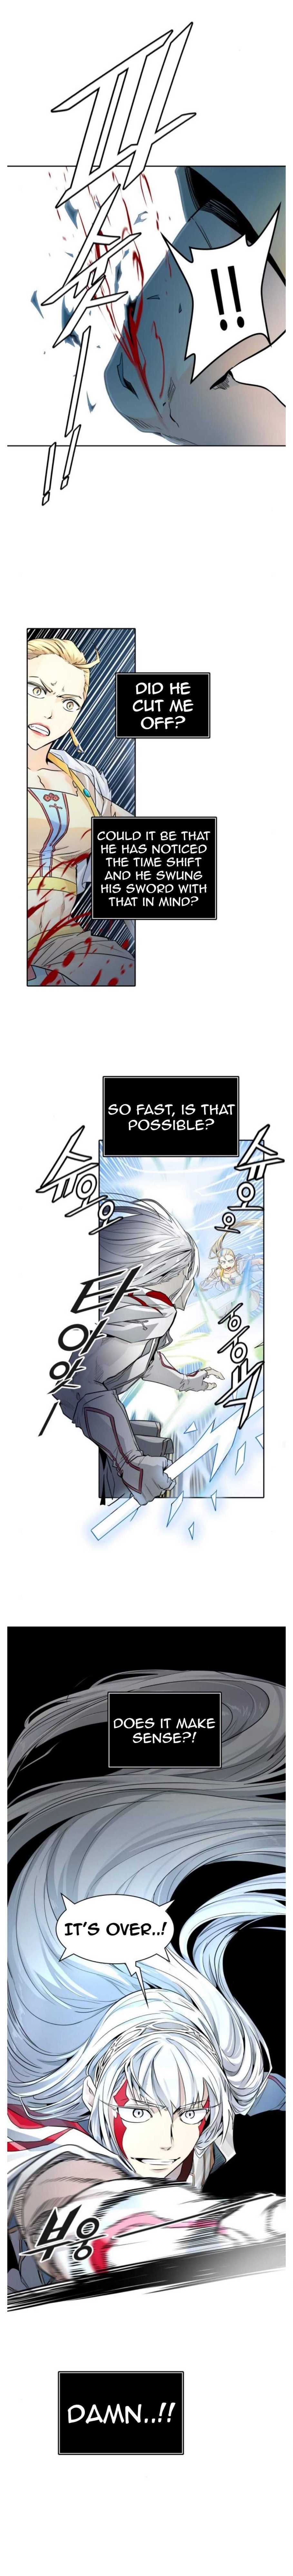 tower of god: Chapter 498 - Page 14